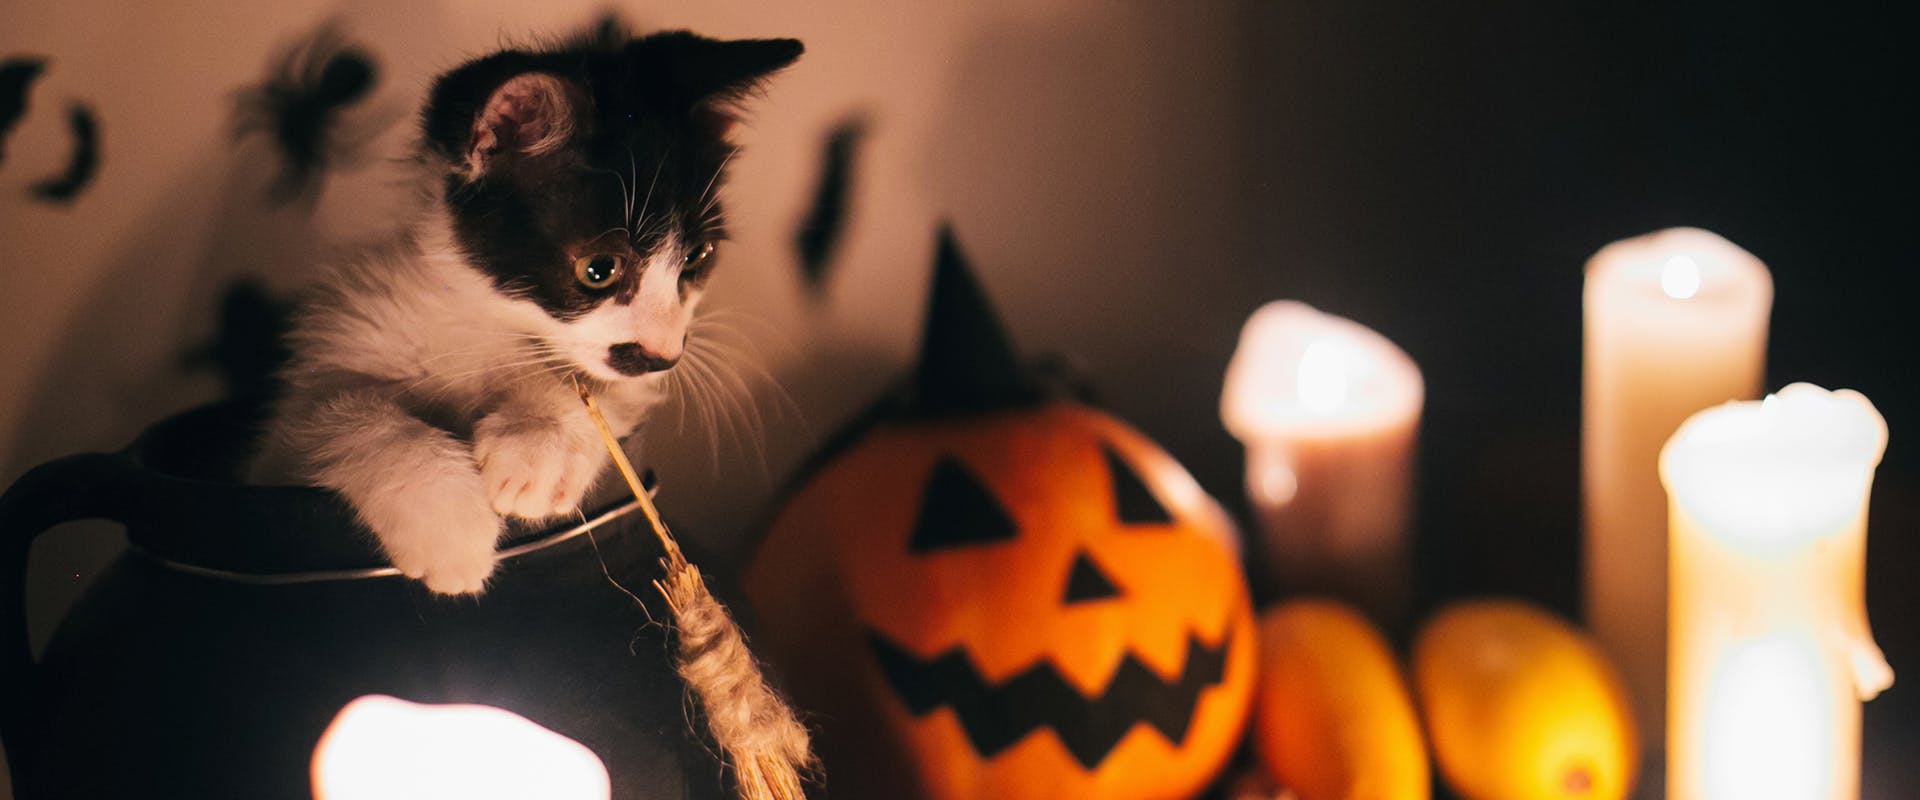 A kitten sat in a cauldron, surrounded by candles 